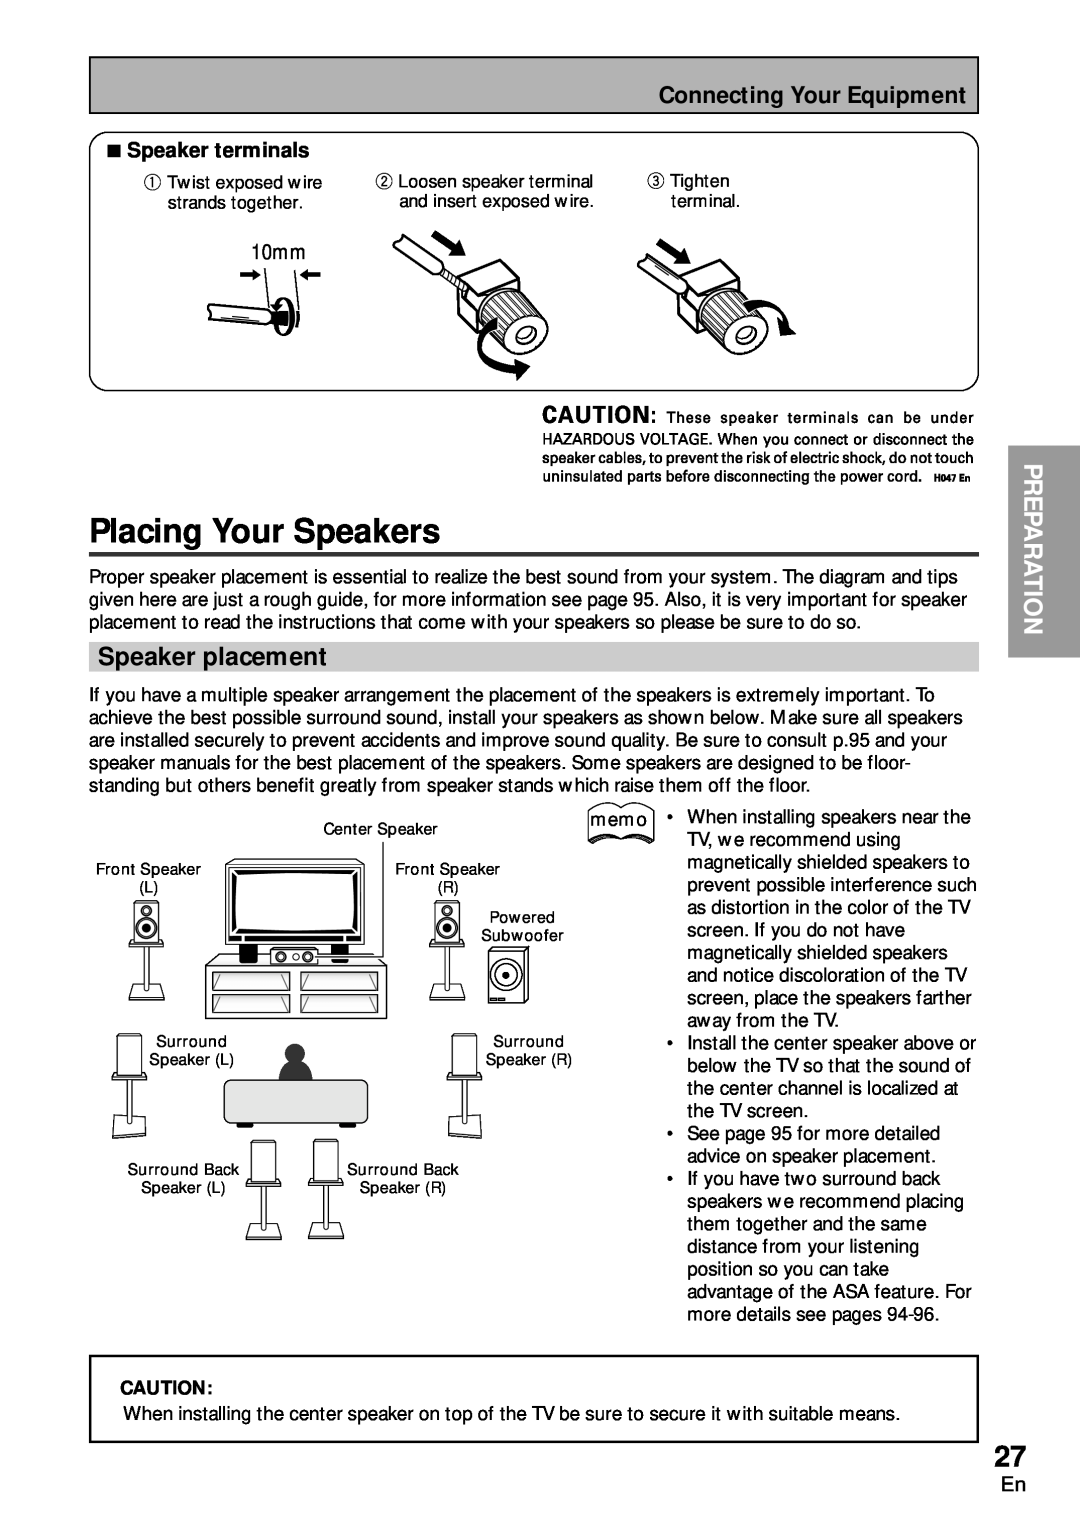 Pioneer VSA-AX10 operating instructions Placing Your Speakers, Speaker placement, Preparation, 10mm 